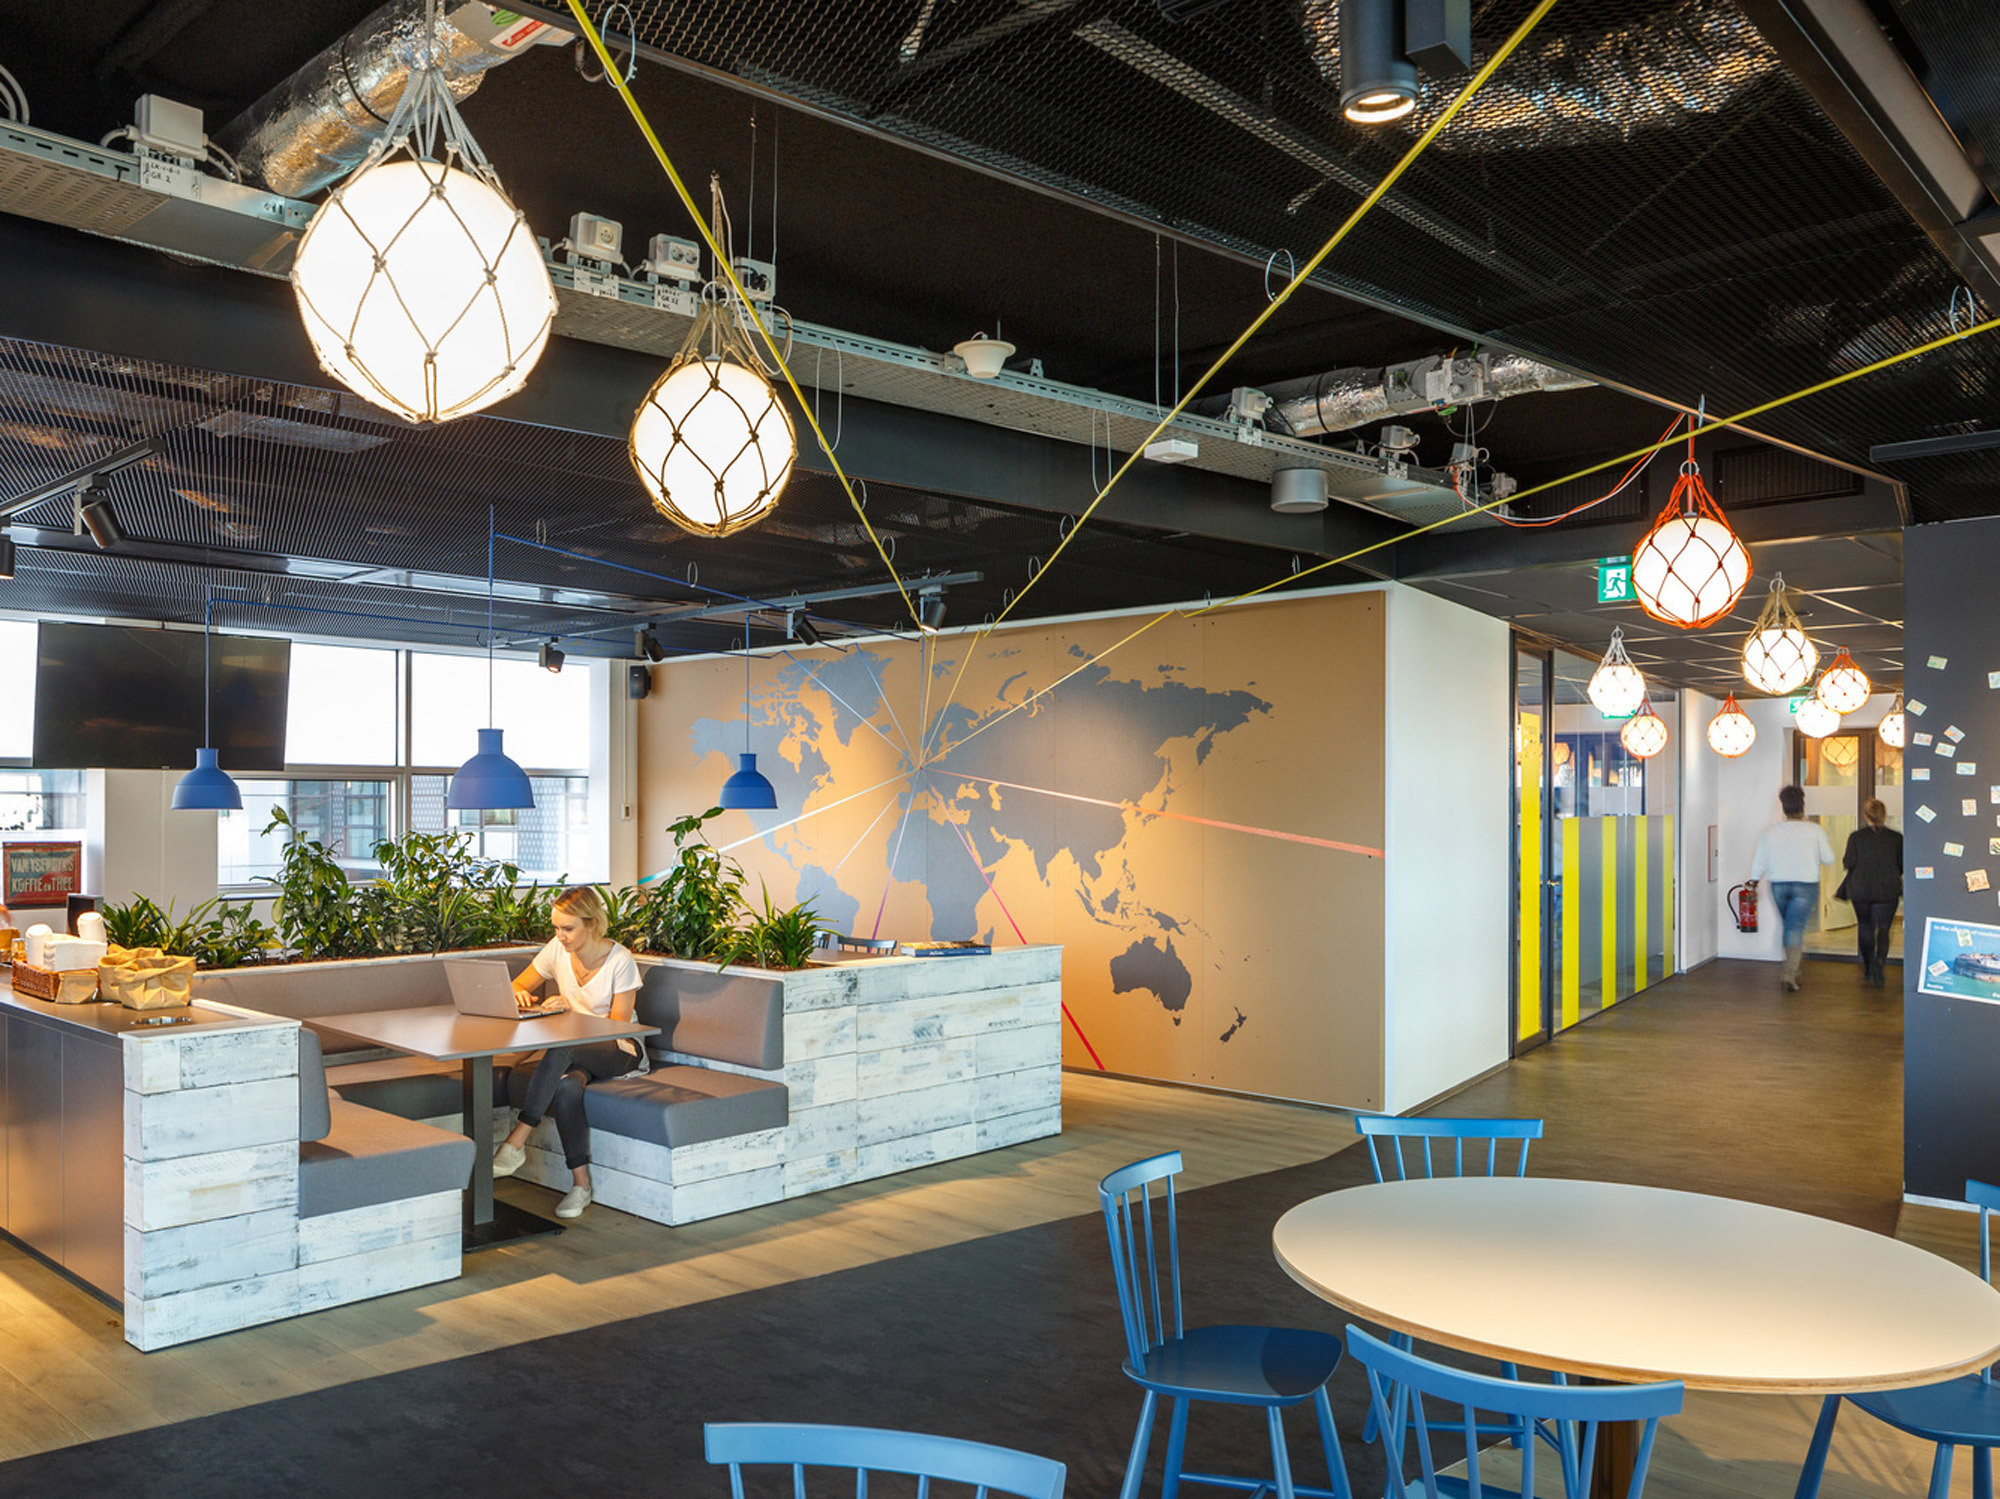 Modern office break area with eclectic hanging pendant lights, a world map mural on a white divider, and casual seating made from repurposed wooden pallets. The space features a mix of blue chairs, high ceilings with exposed ductwork, and an overall industrial chic vibe.